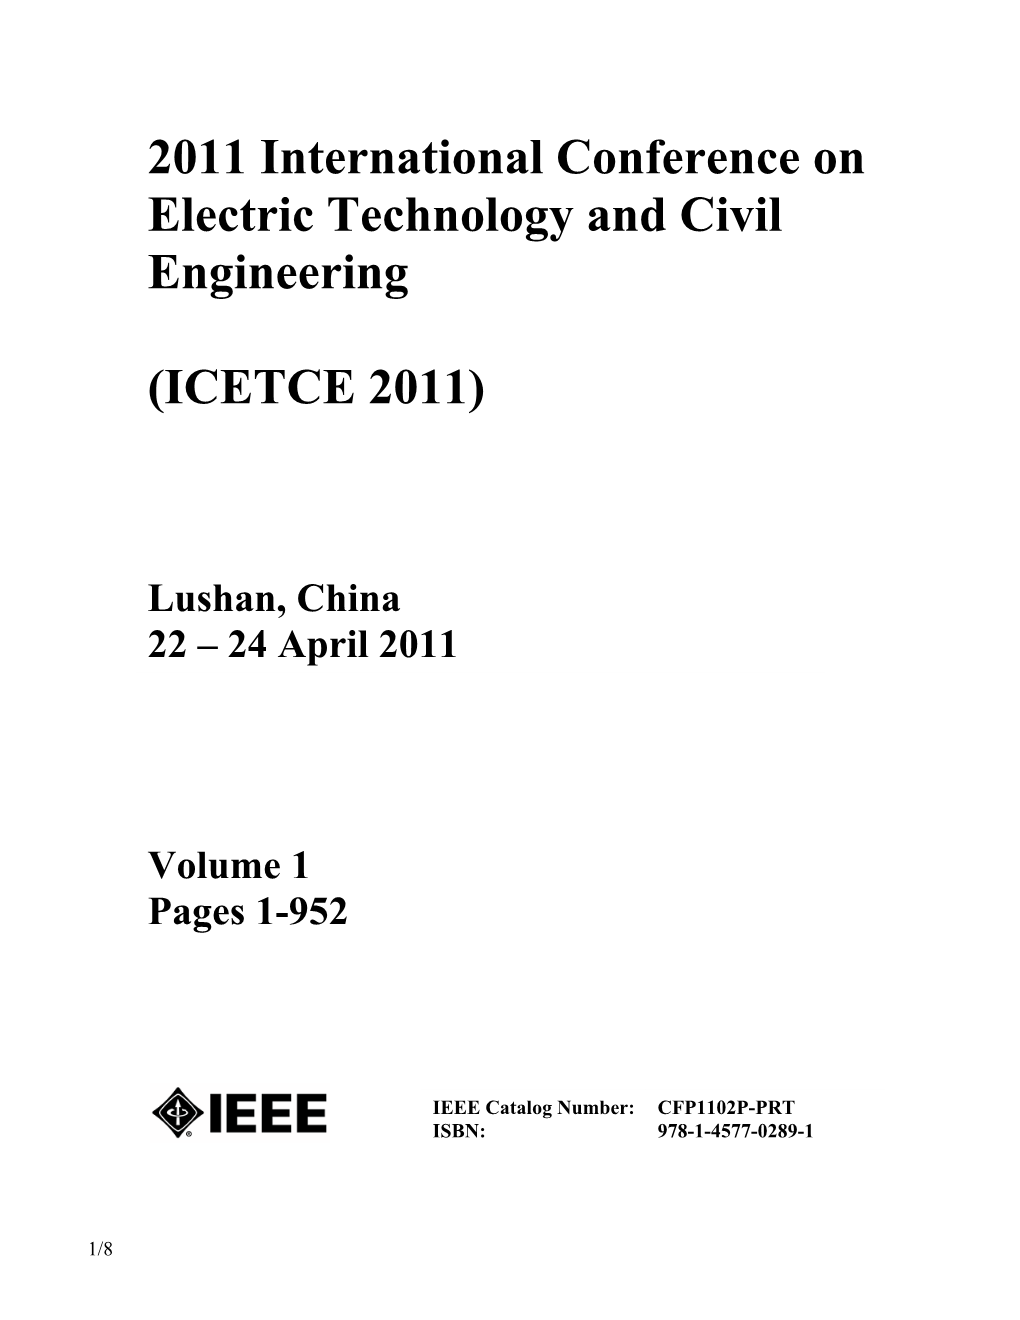 2011 International Conference on Electric Technology and Civil Engineering